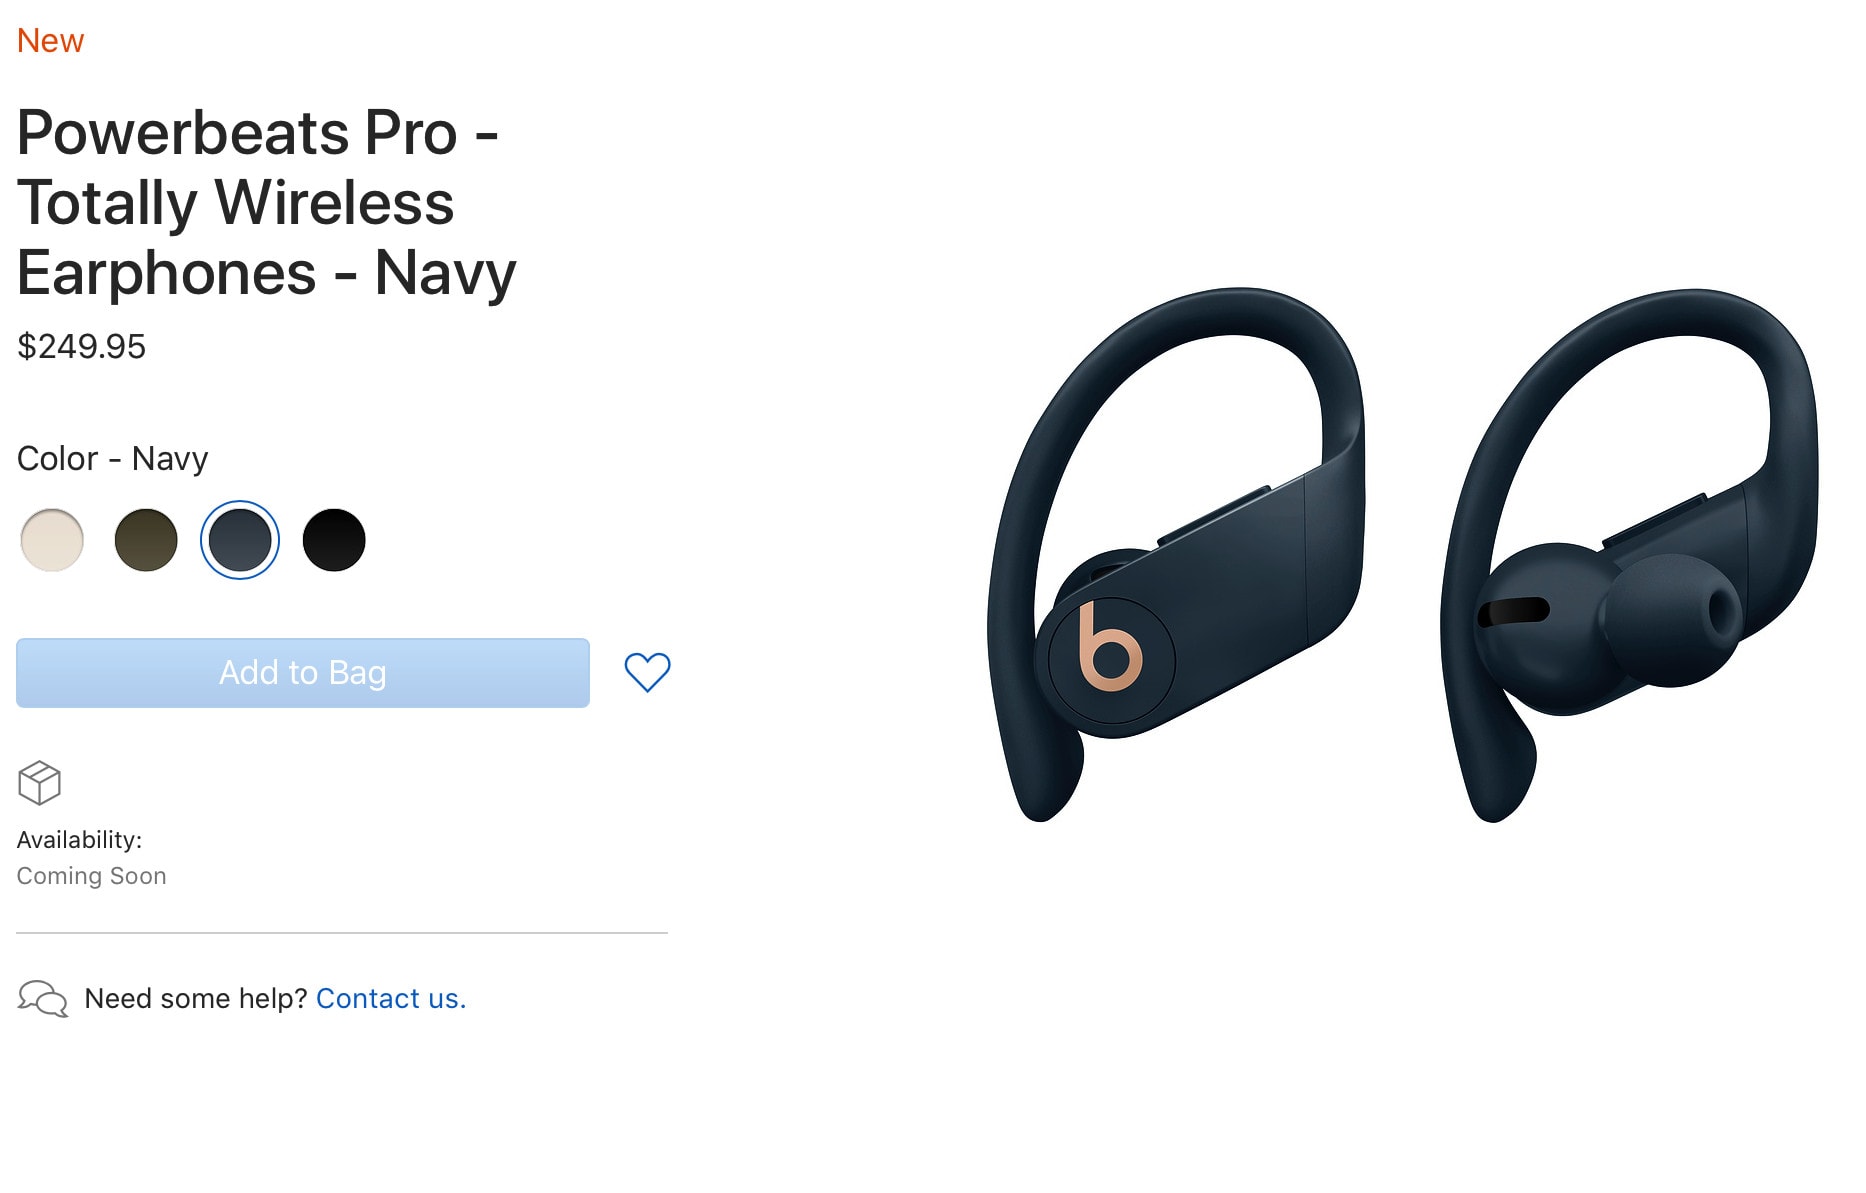 pre-order your Powerbeats Pro earbuds 